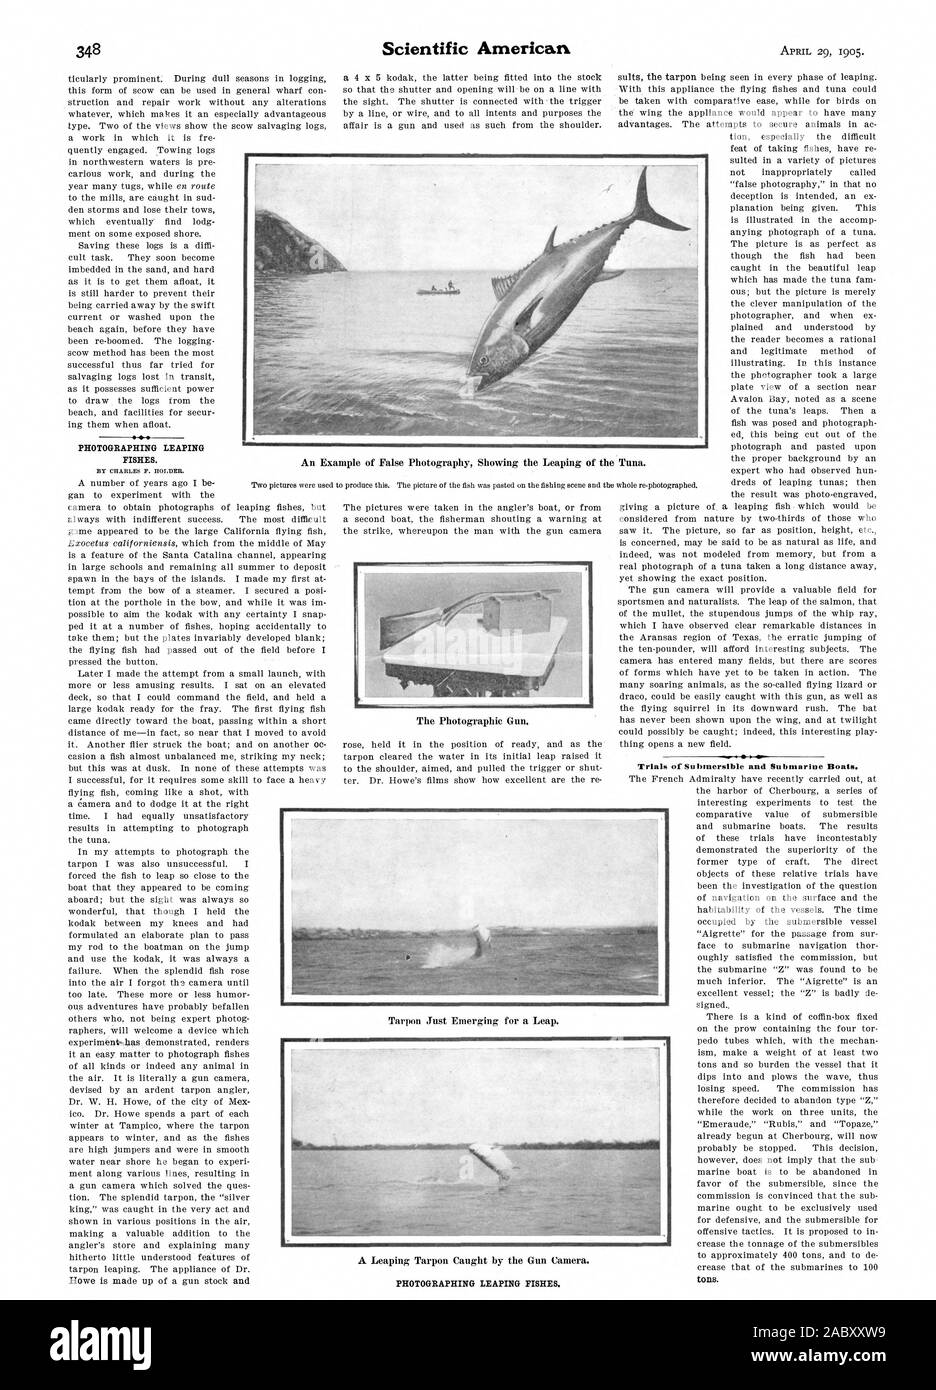 BY CHARLES F. HOLDER. Trials of Submersible and Submarine Boats., scientific american, 1905-04-11 Stock Photo